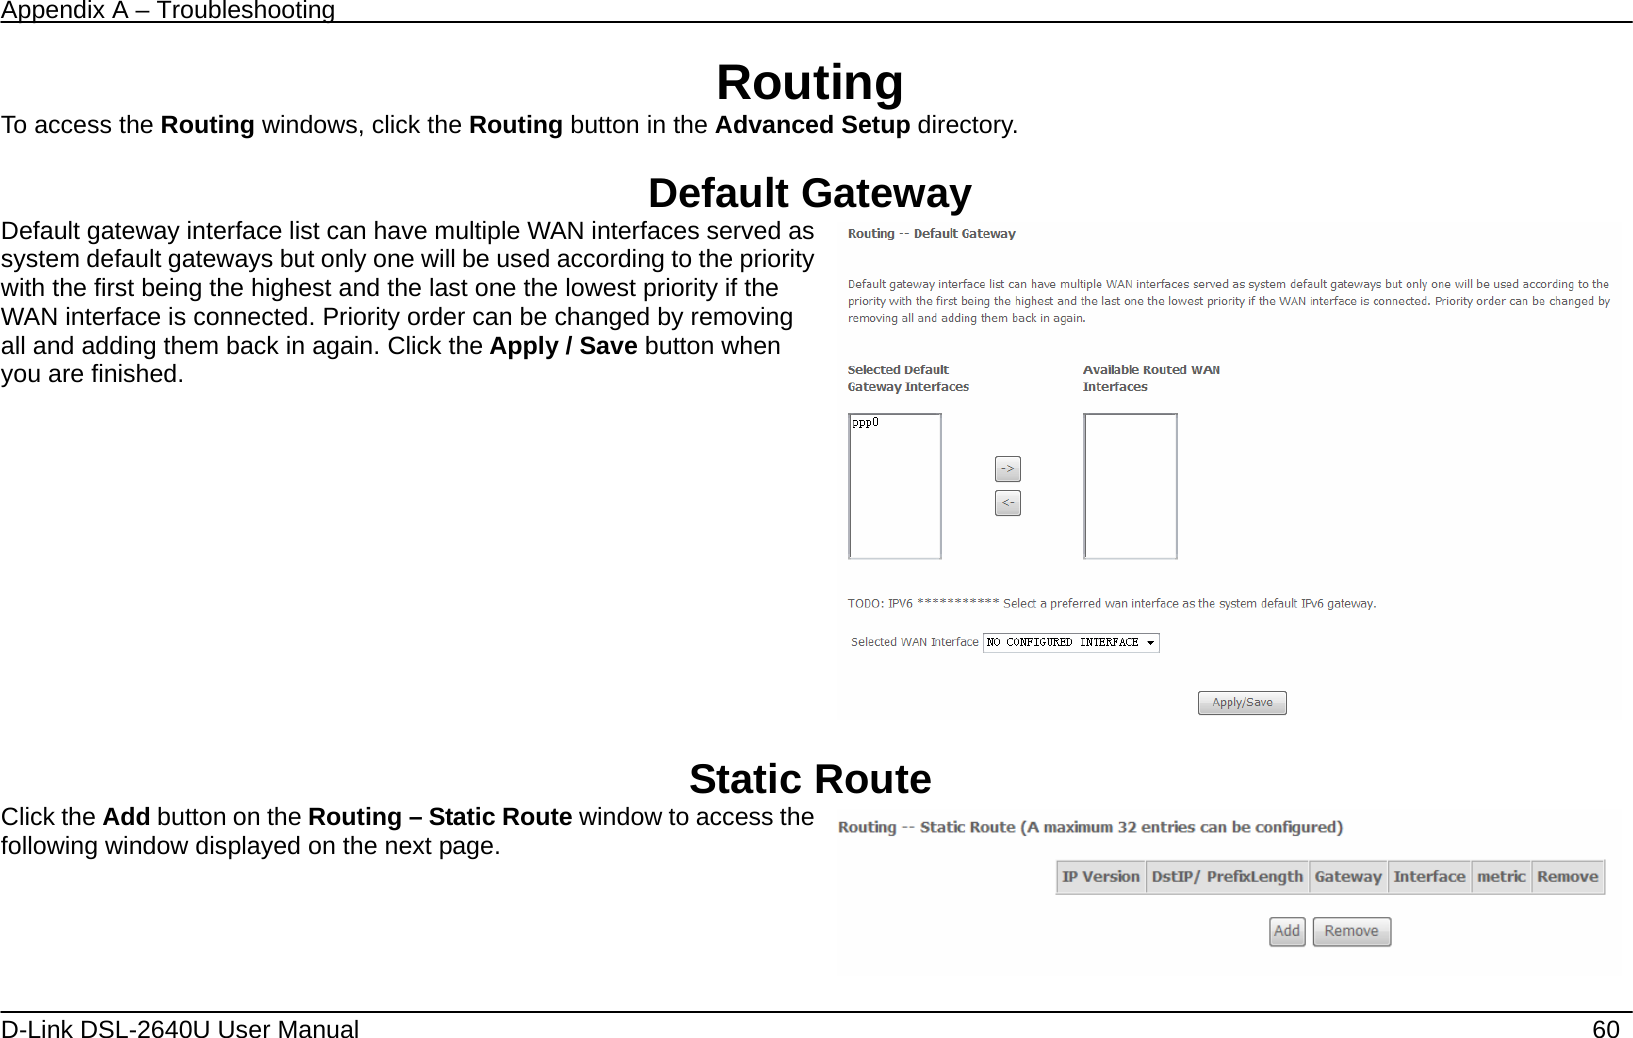 Appendix A – Troubleshooting   D-Link DSL-2640U User Manual    60 Routing To access the Routing windows, click the Routing button in the Advanced Setup directory.  Default Gateway Default gateway interface list can have multiple WAN interfaces served as system default gateways but only one will be used according to the priority with the first being the highest and the last one the lowest priority if the WAN interface is connected. Priority order can be changed by removing all and adding them back in again. Click the Apply / Save button when you are finished.     Static Route Click the Add button on the Routing – Static Route window to access the following window displayed on the next page.     